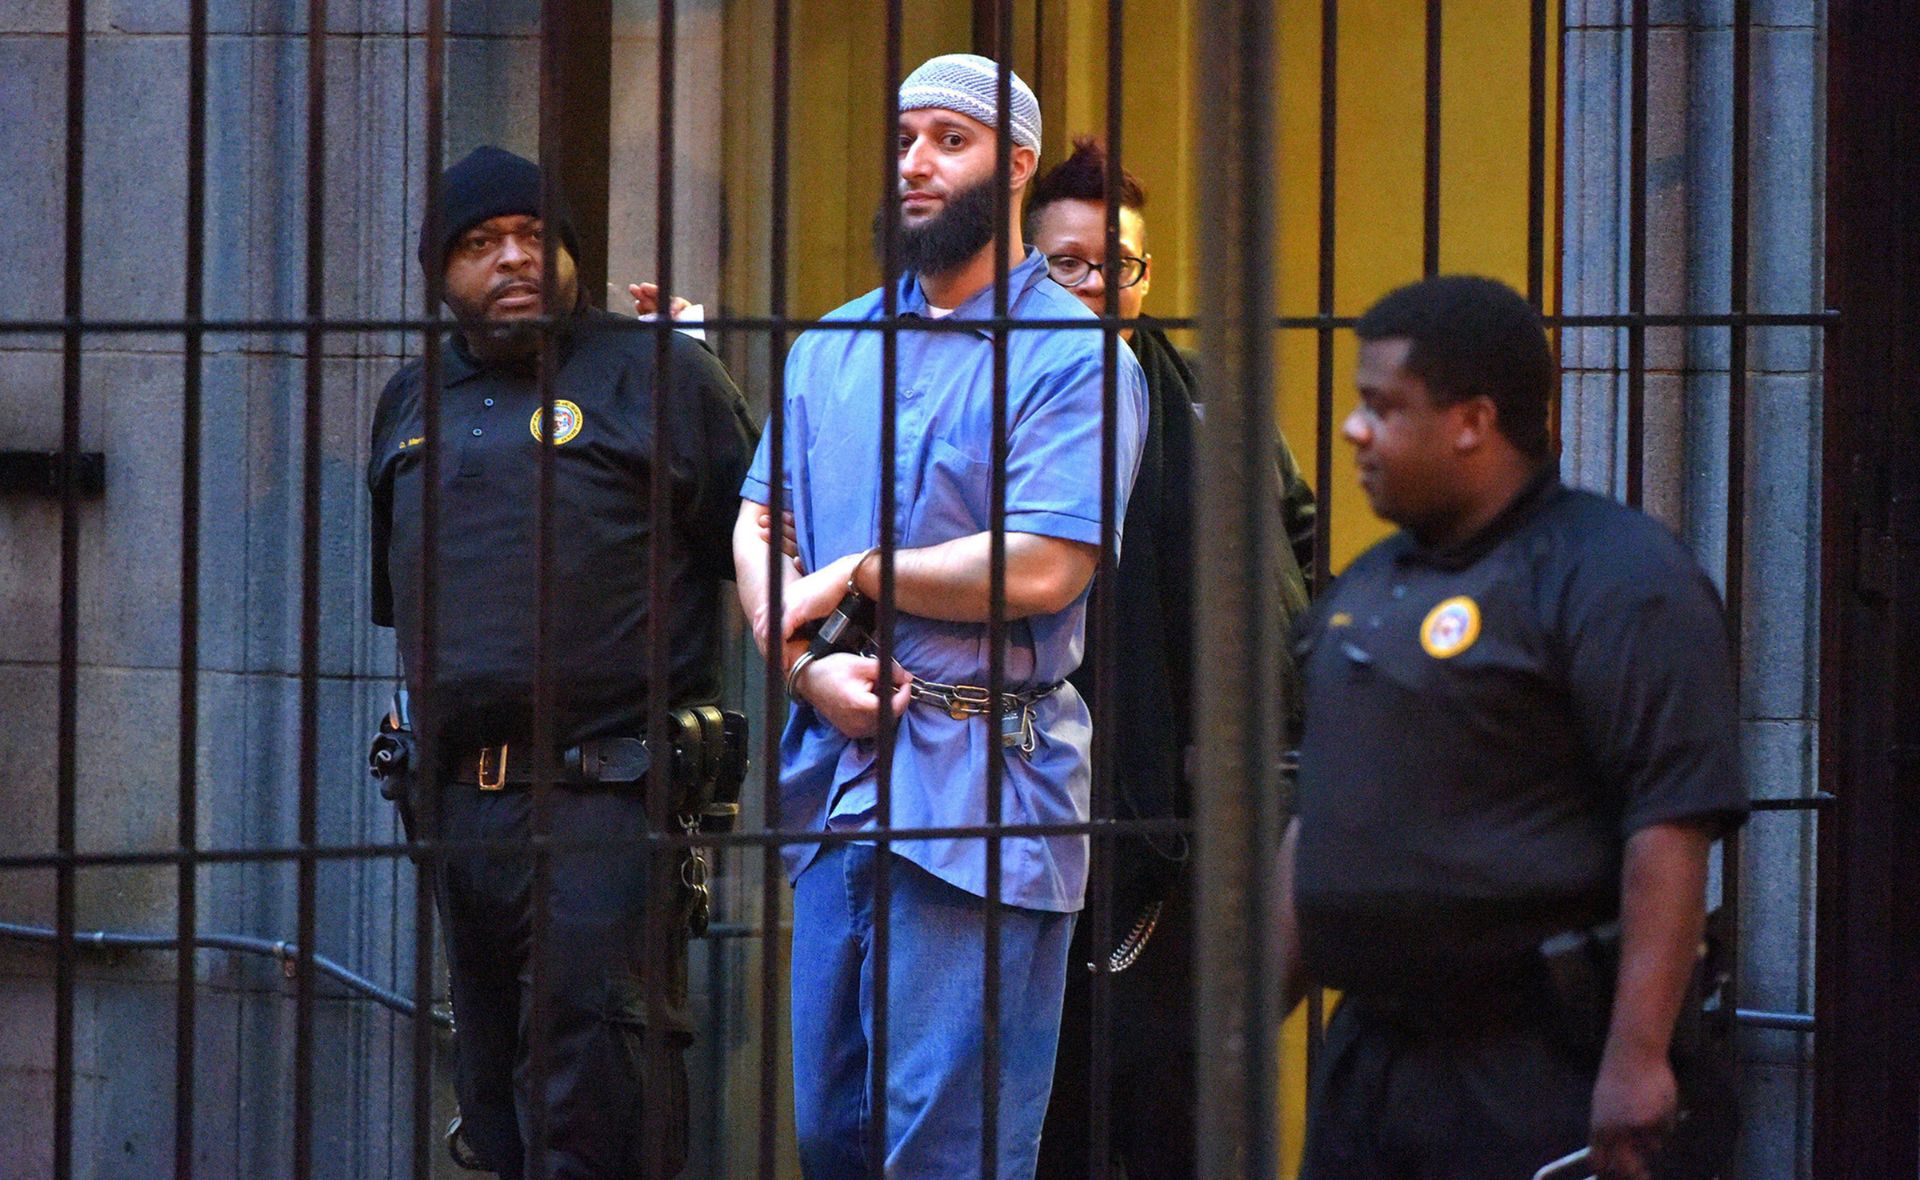 He was charged with murder 23 years ago, now Adnan Syed is free